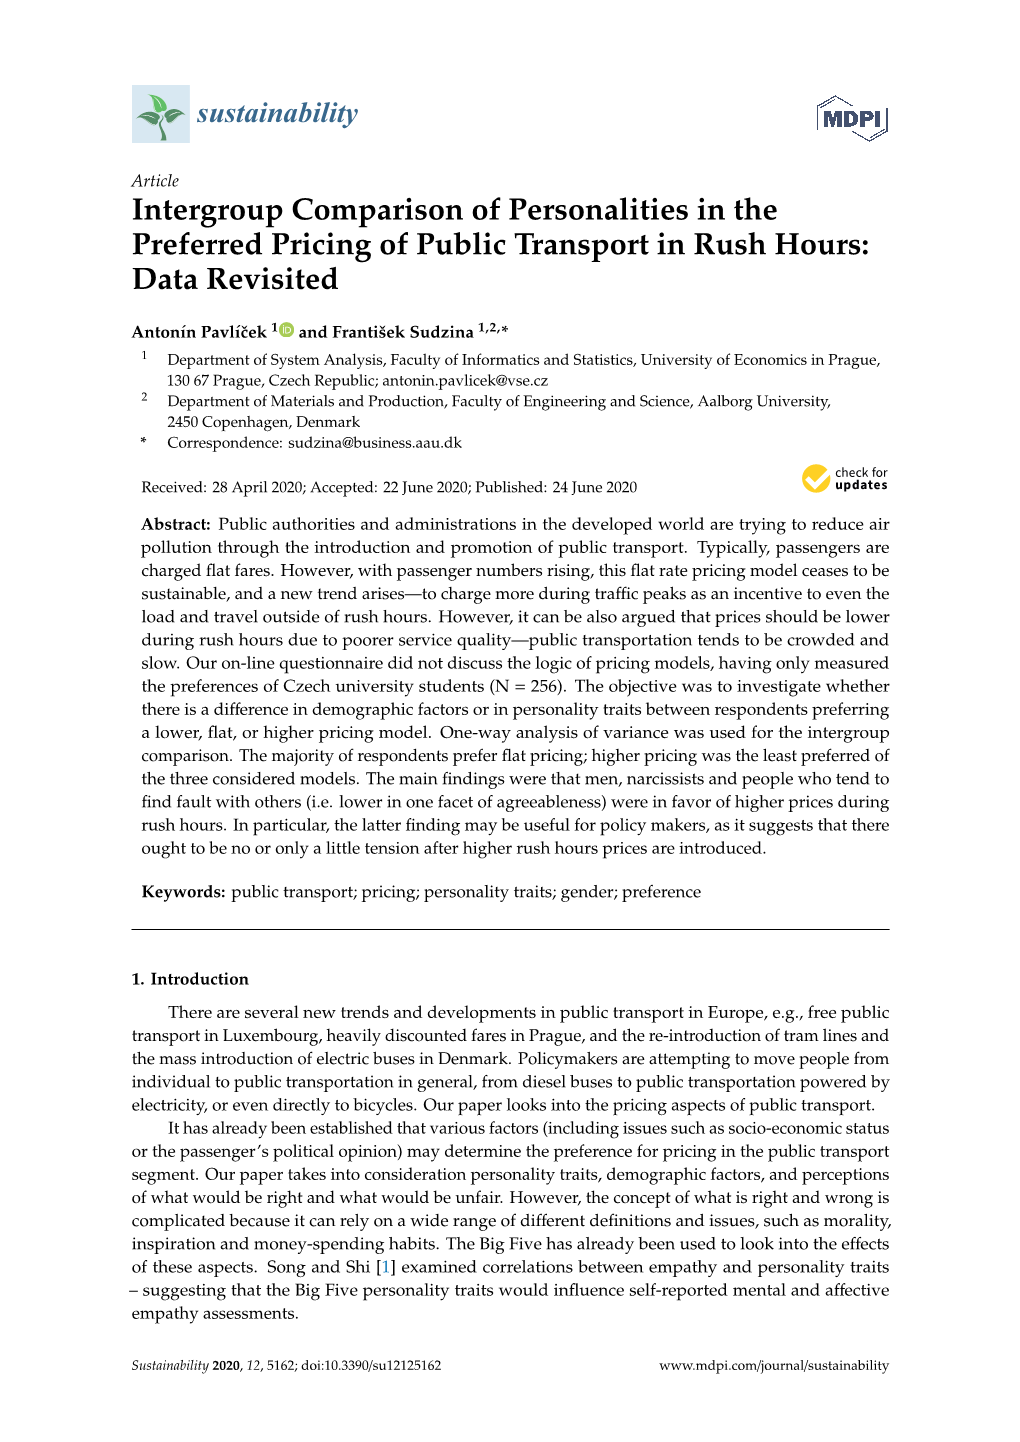 Intergroup Comparison of Personalities in the Preferred Pricing of Public Transport in Rush Hours: Data Revisited